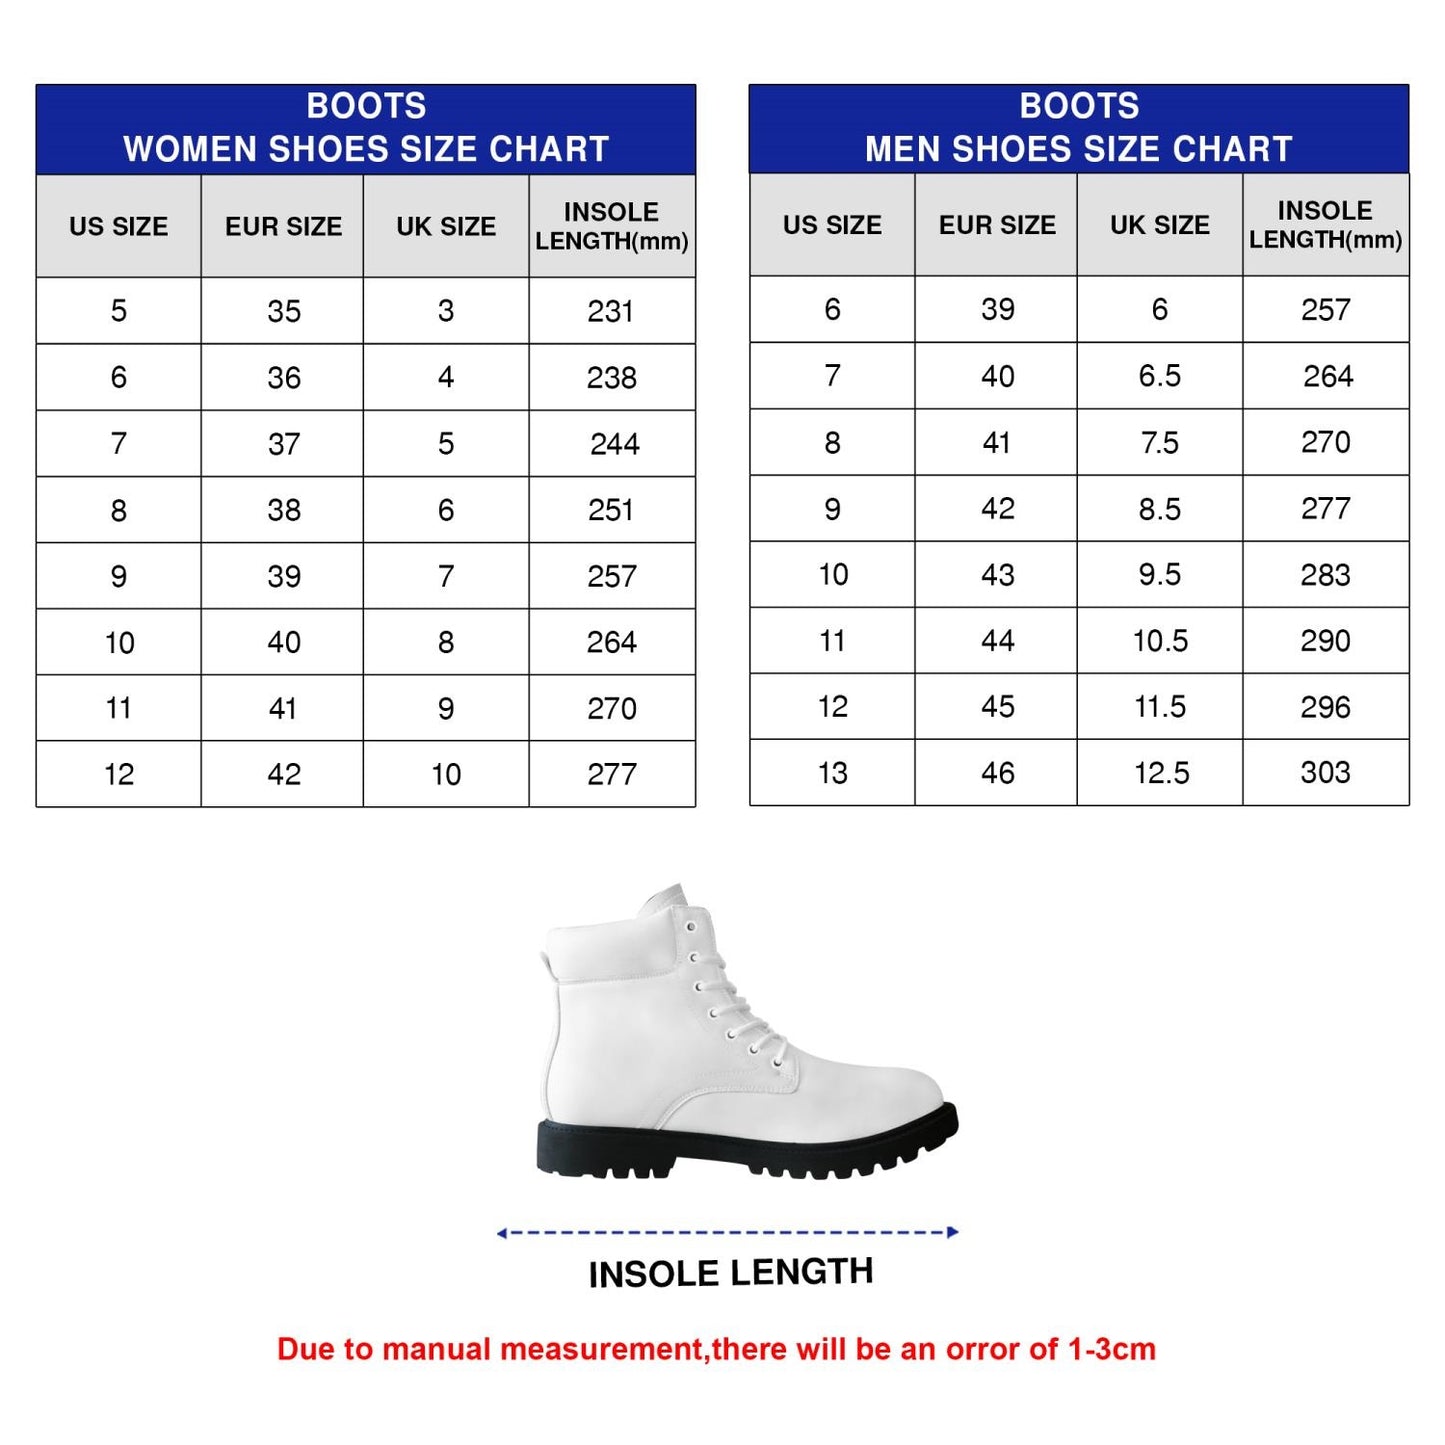 Black Jesus Tbl Boots - Christian Shoes For Men And Women